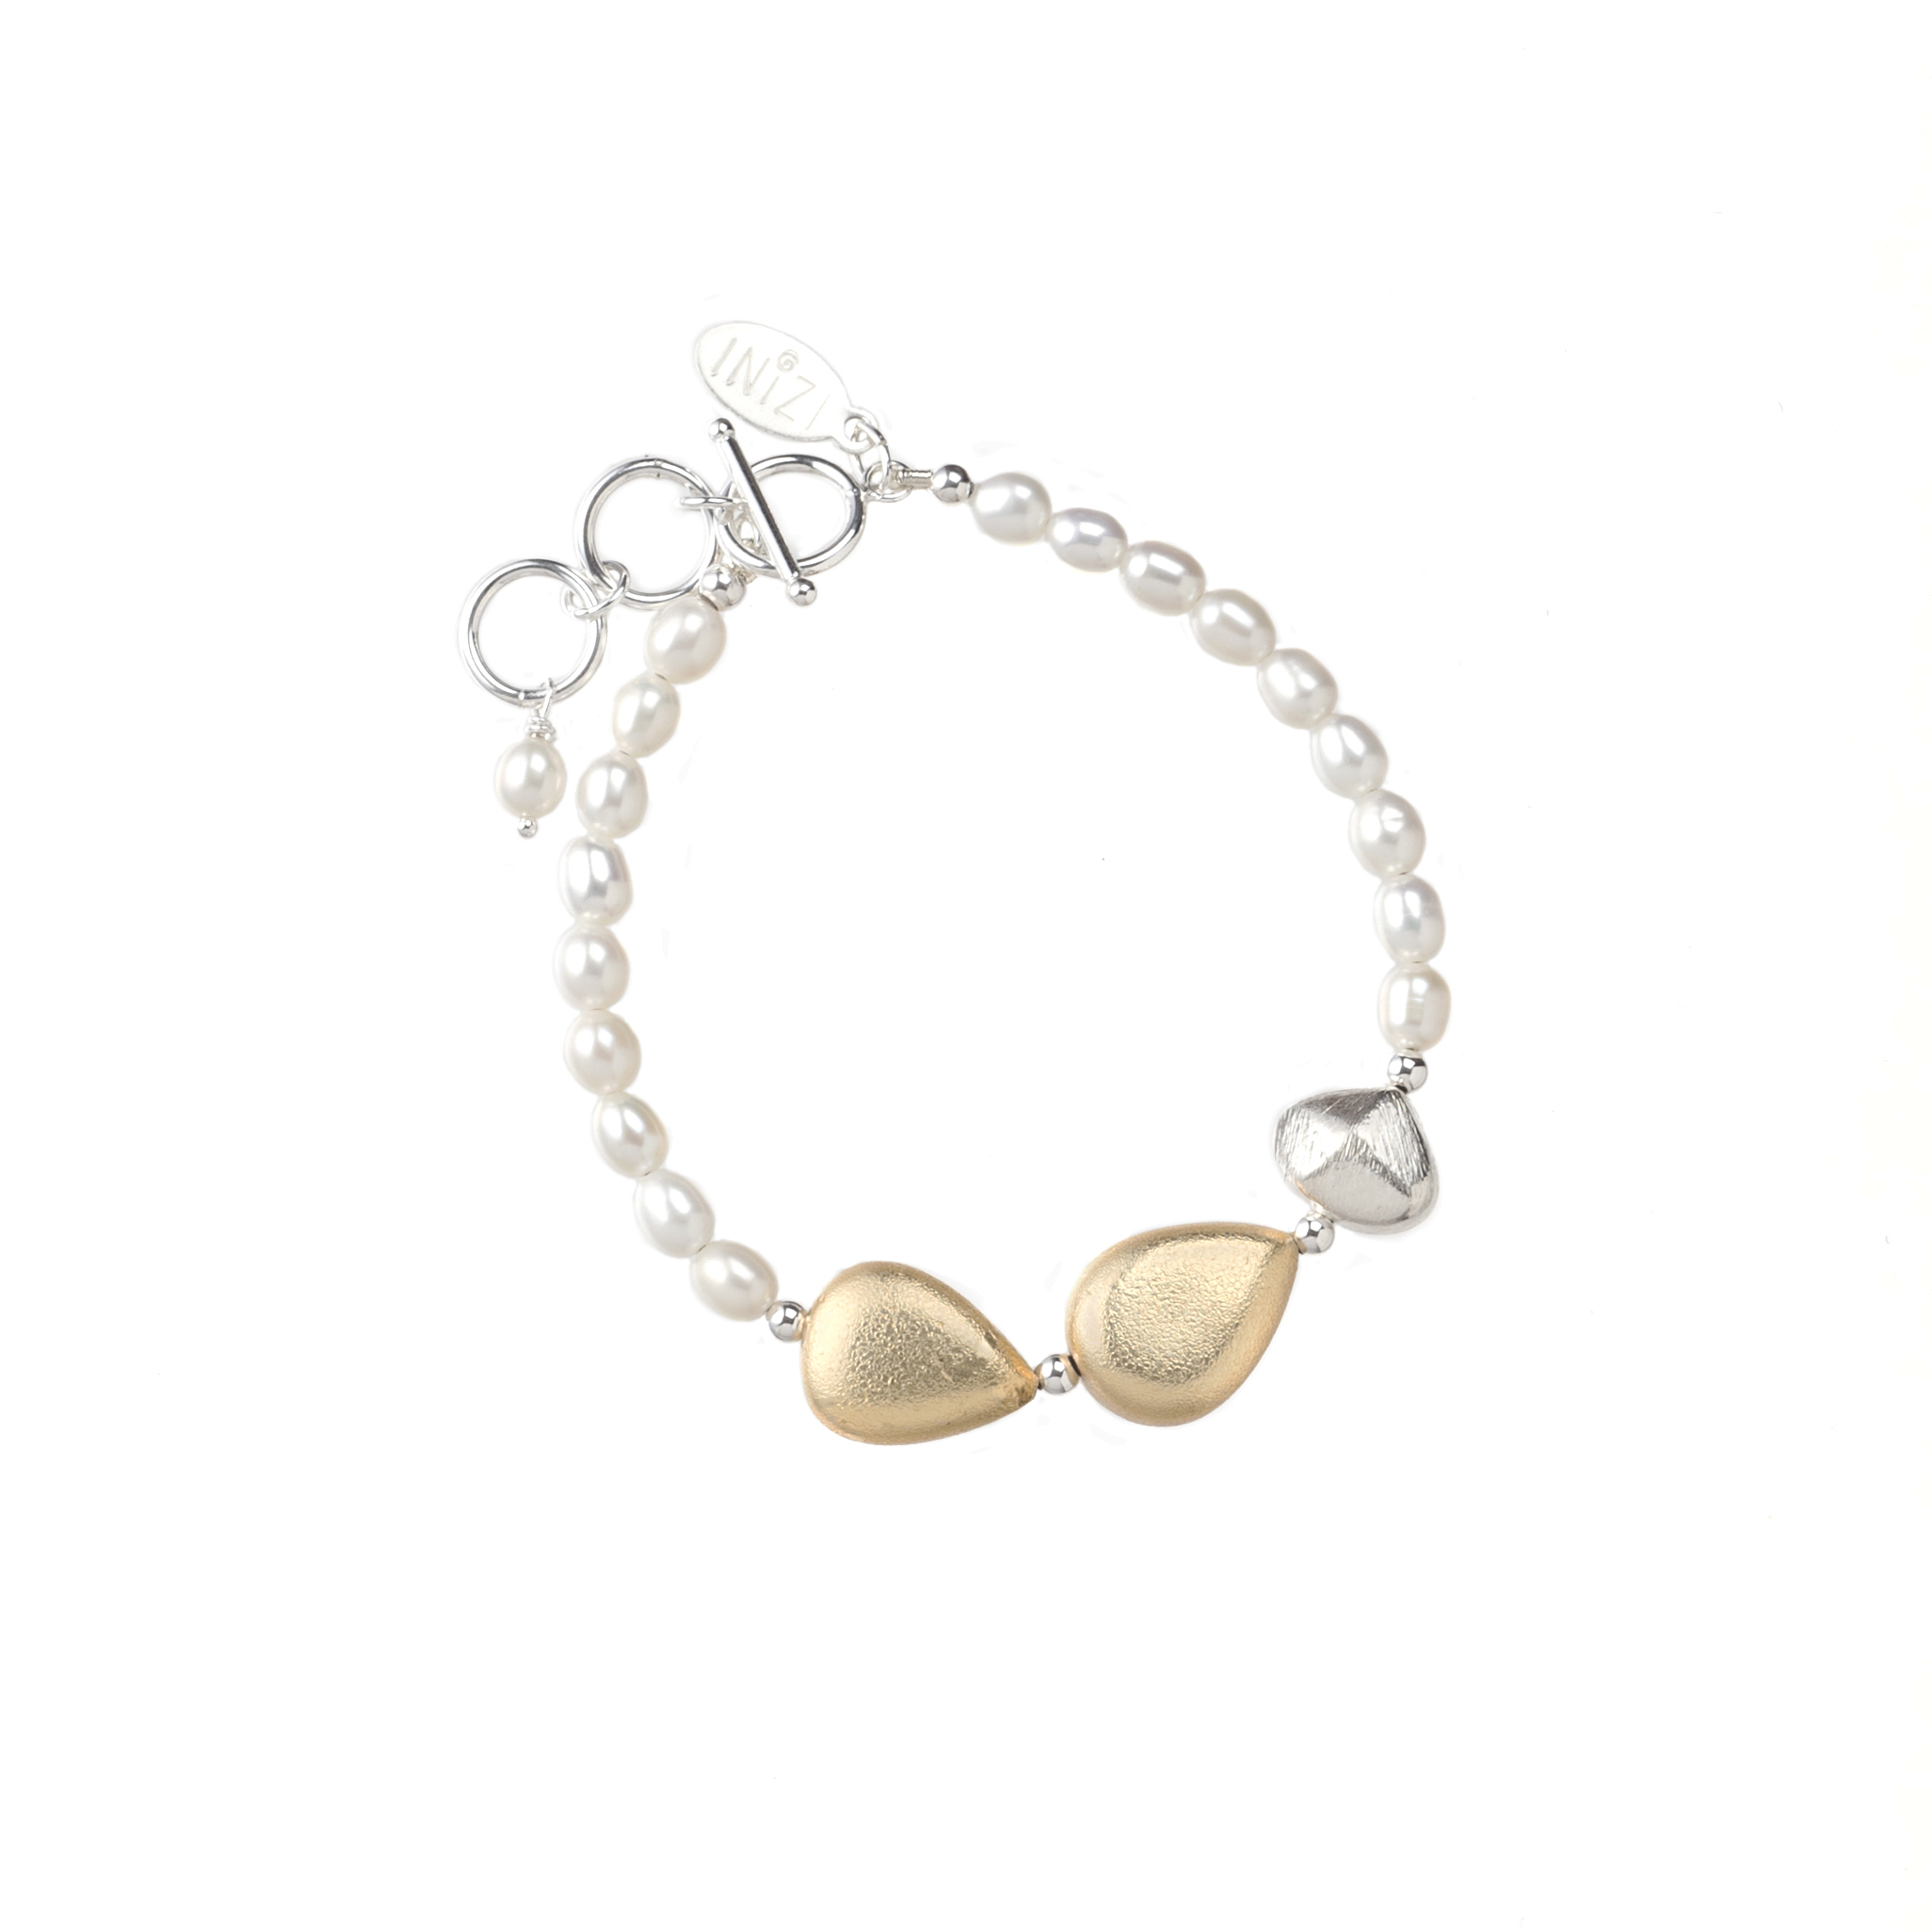 Pearls with Vermeil and Sterling Silver Silk Knotted Bracelet